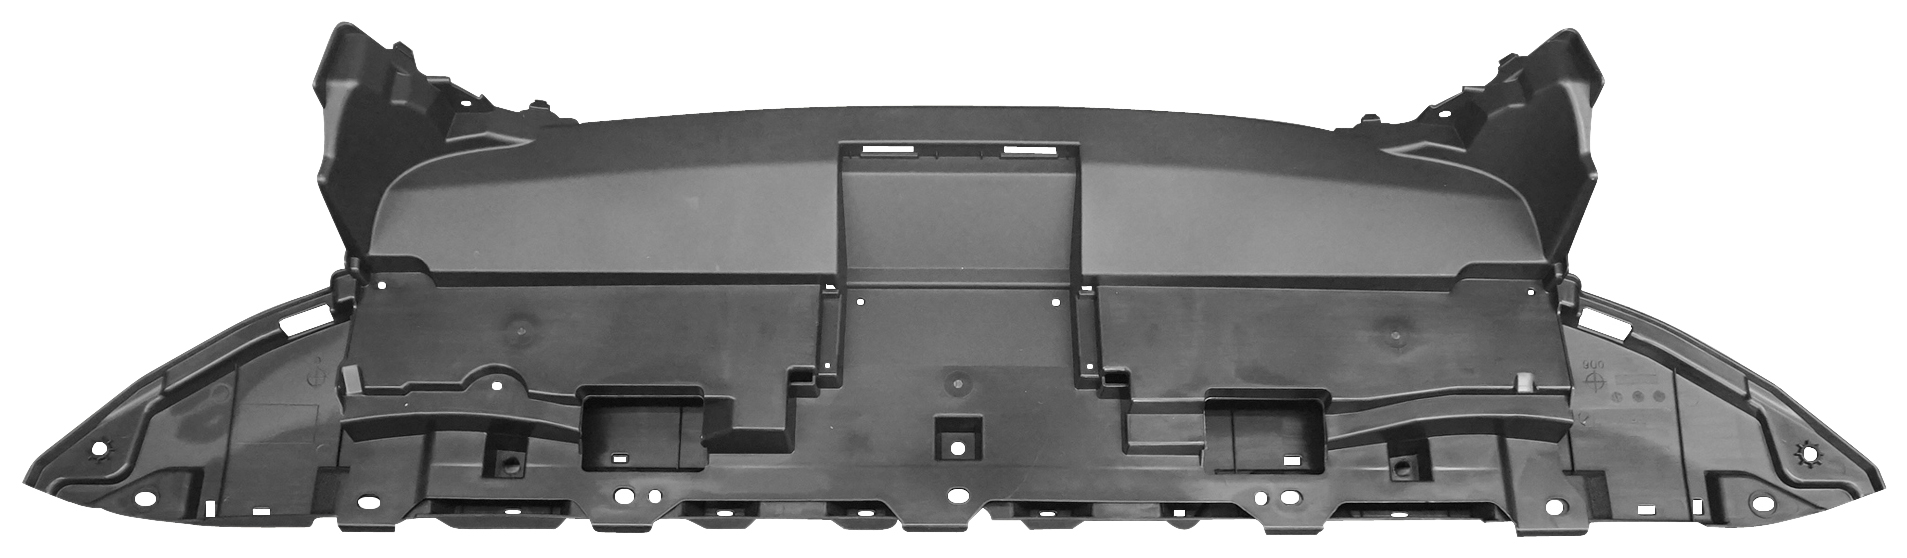 Aftermarket UNDER ENGINE COVERS for HONDA - ACCORD, ACCORD,18-20,Lower engine cover